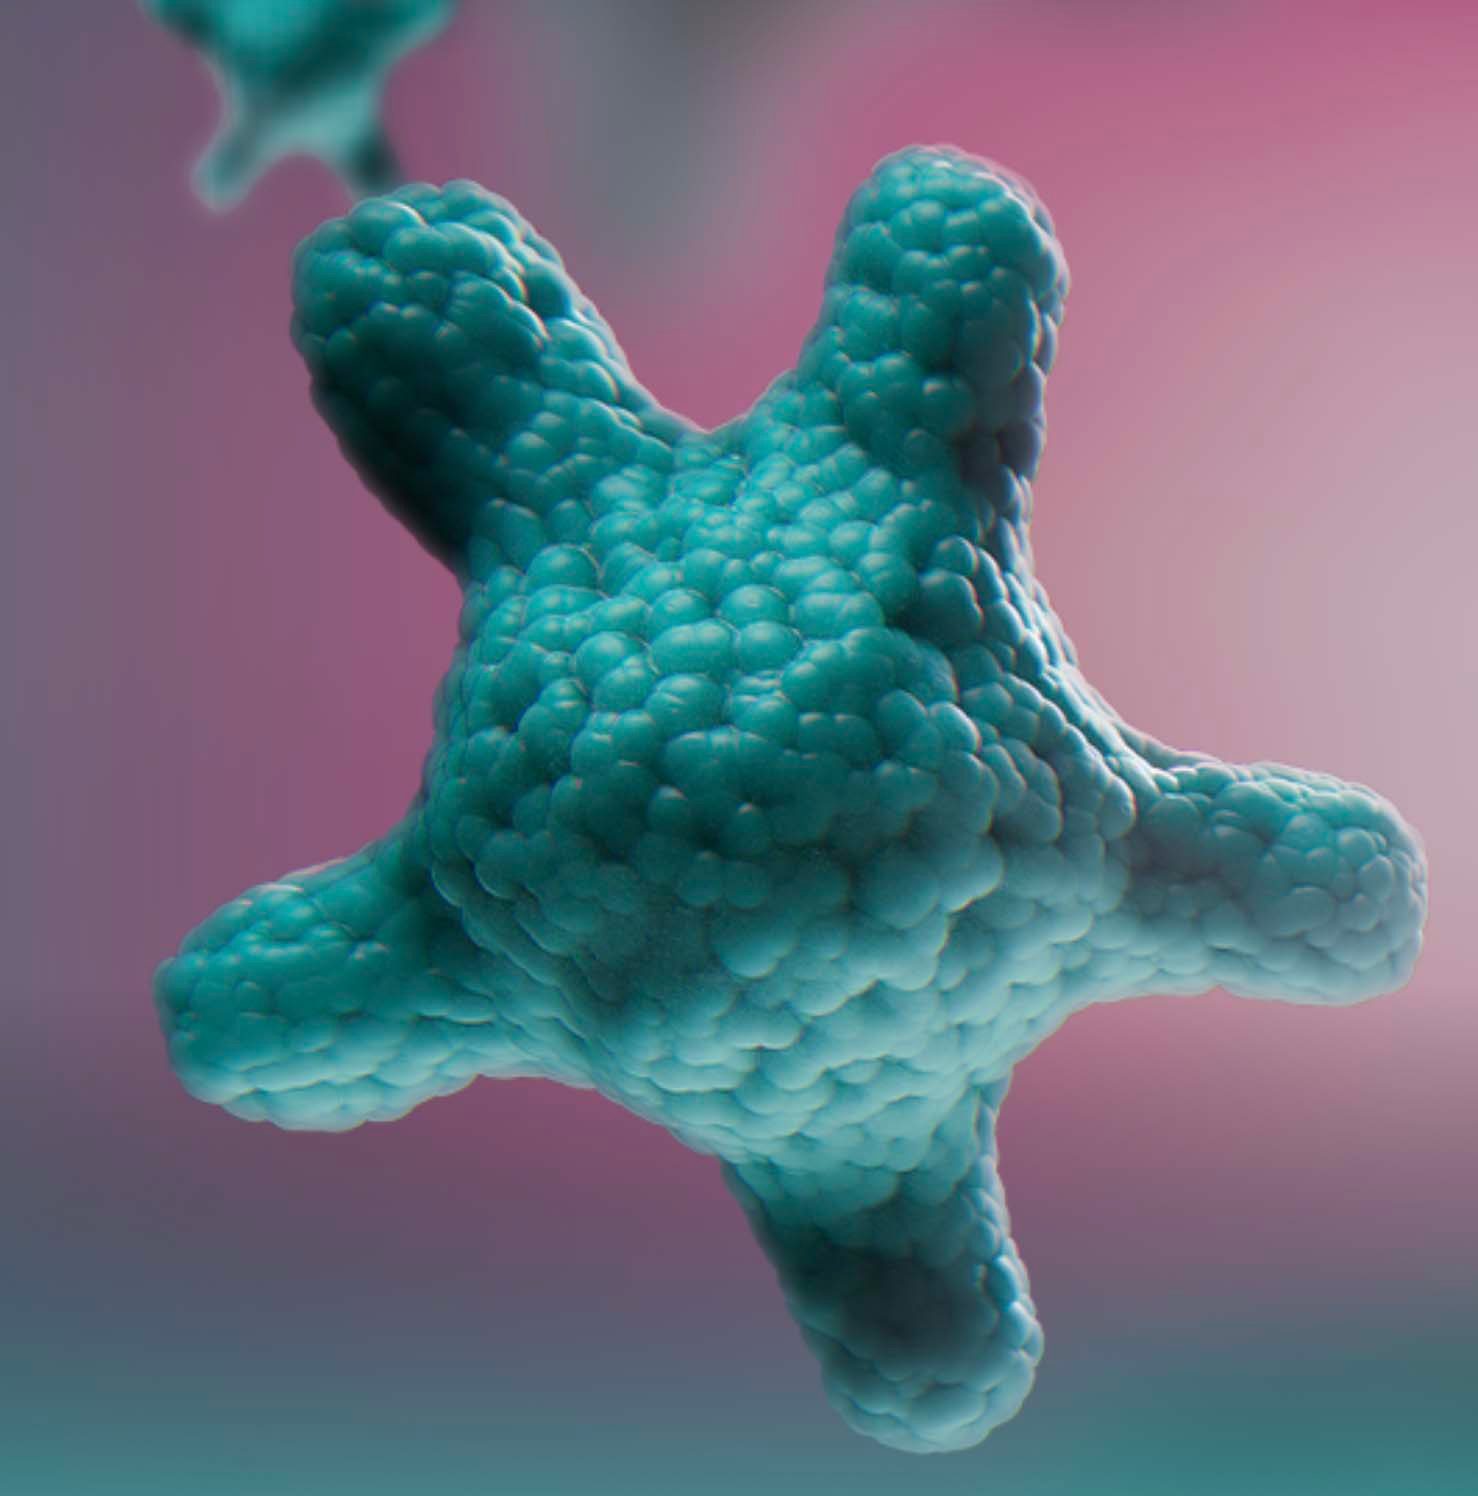 This image shows a 3D animation of an organoid for HUB Organoids